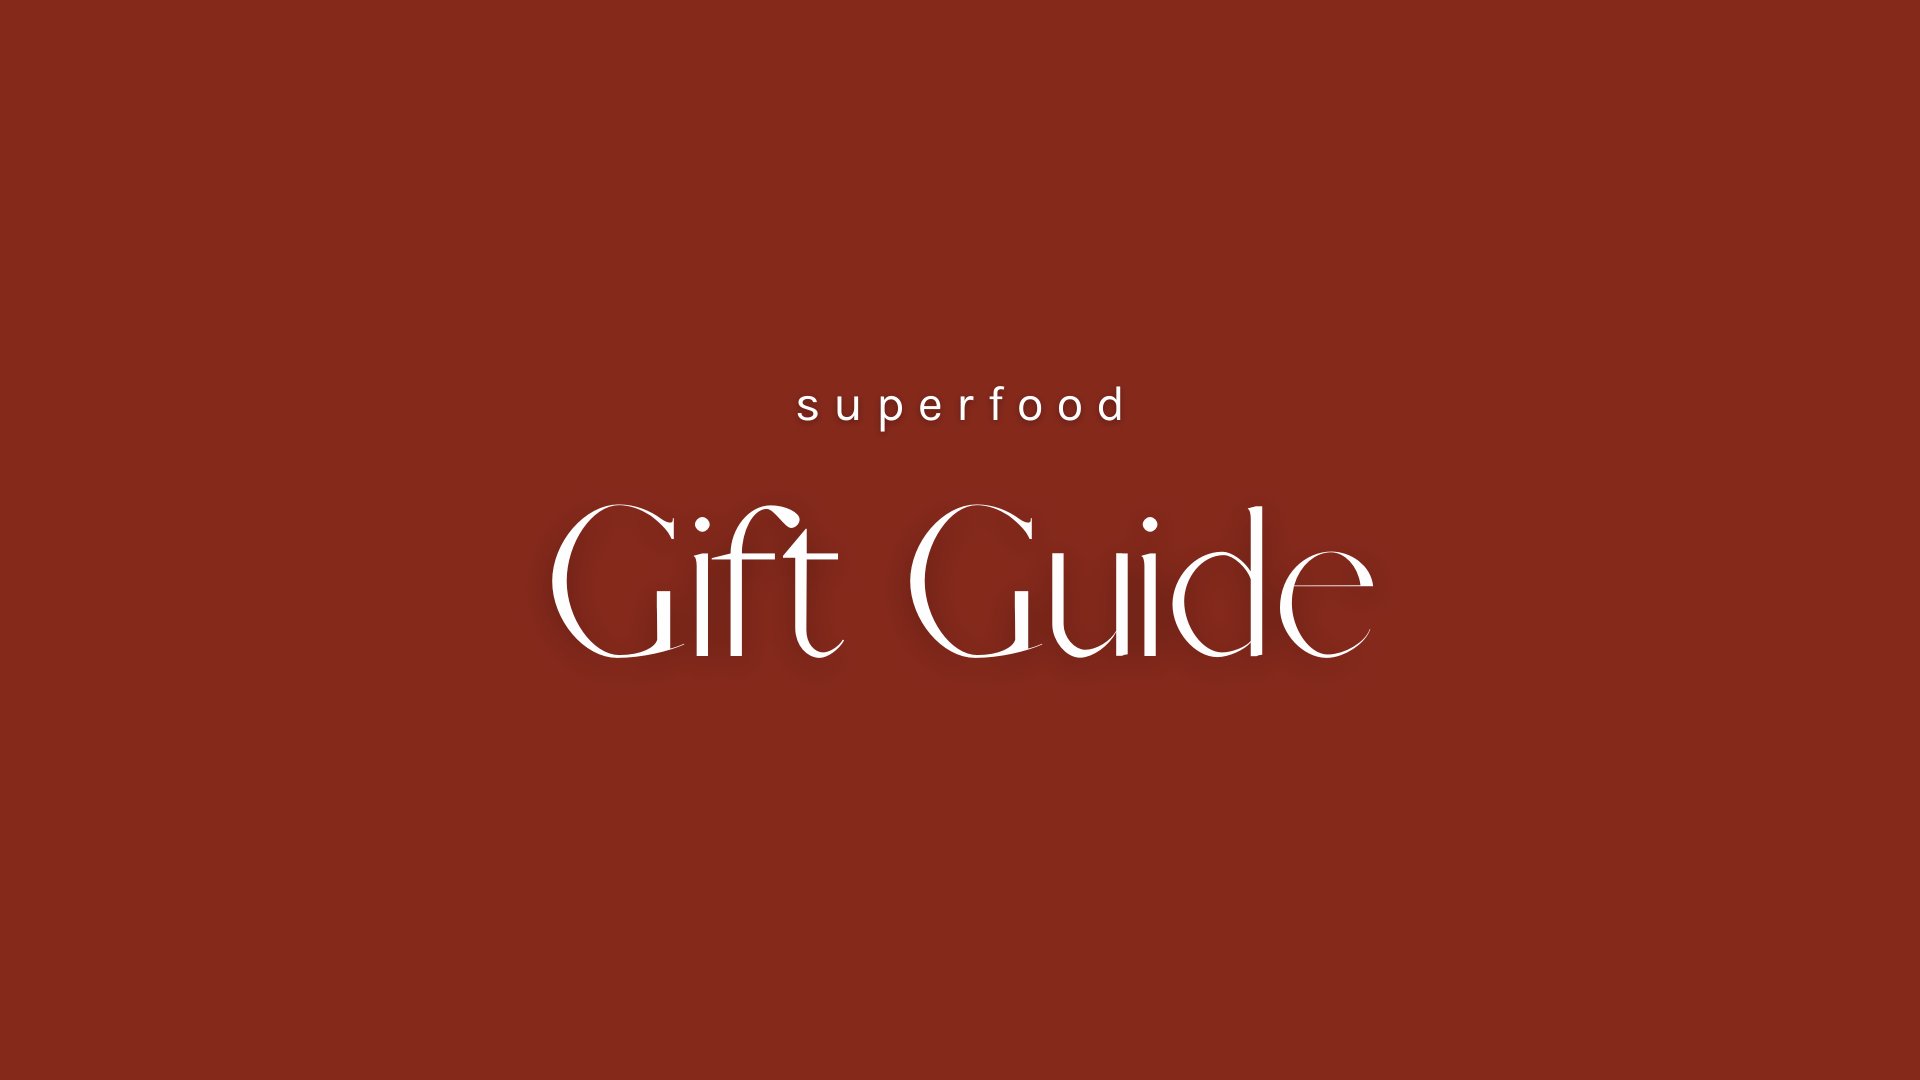 Superfood Gift Guide